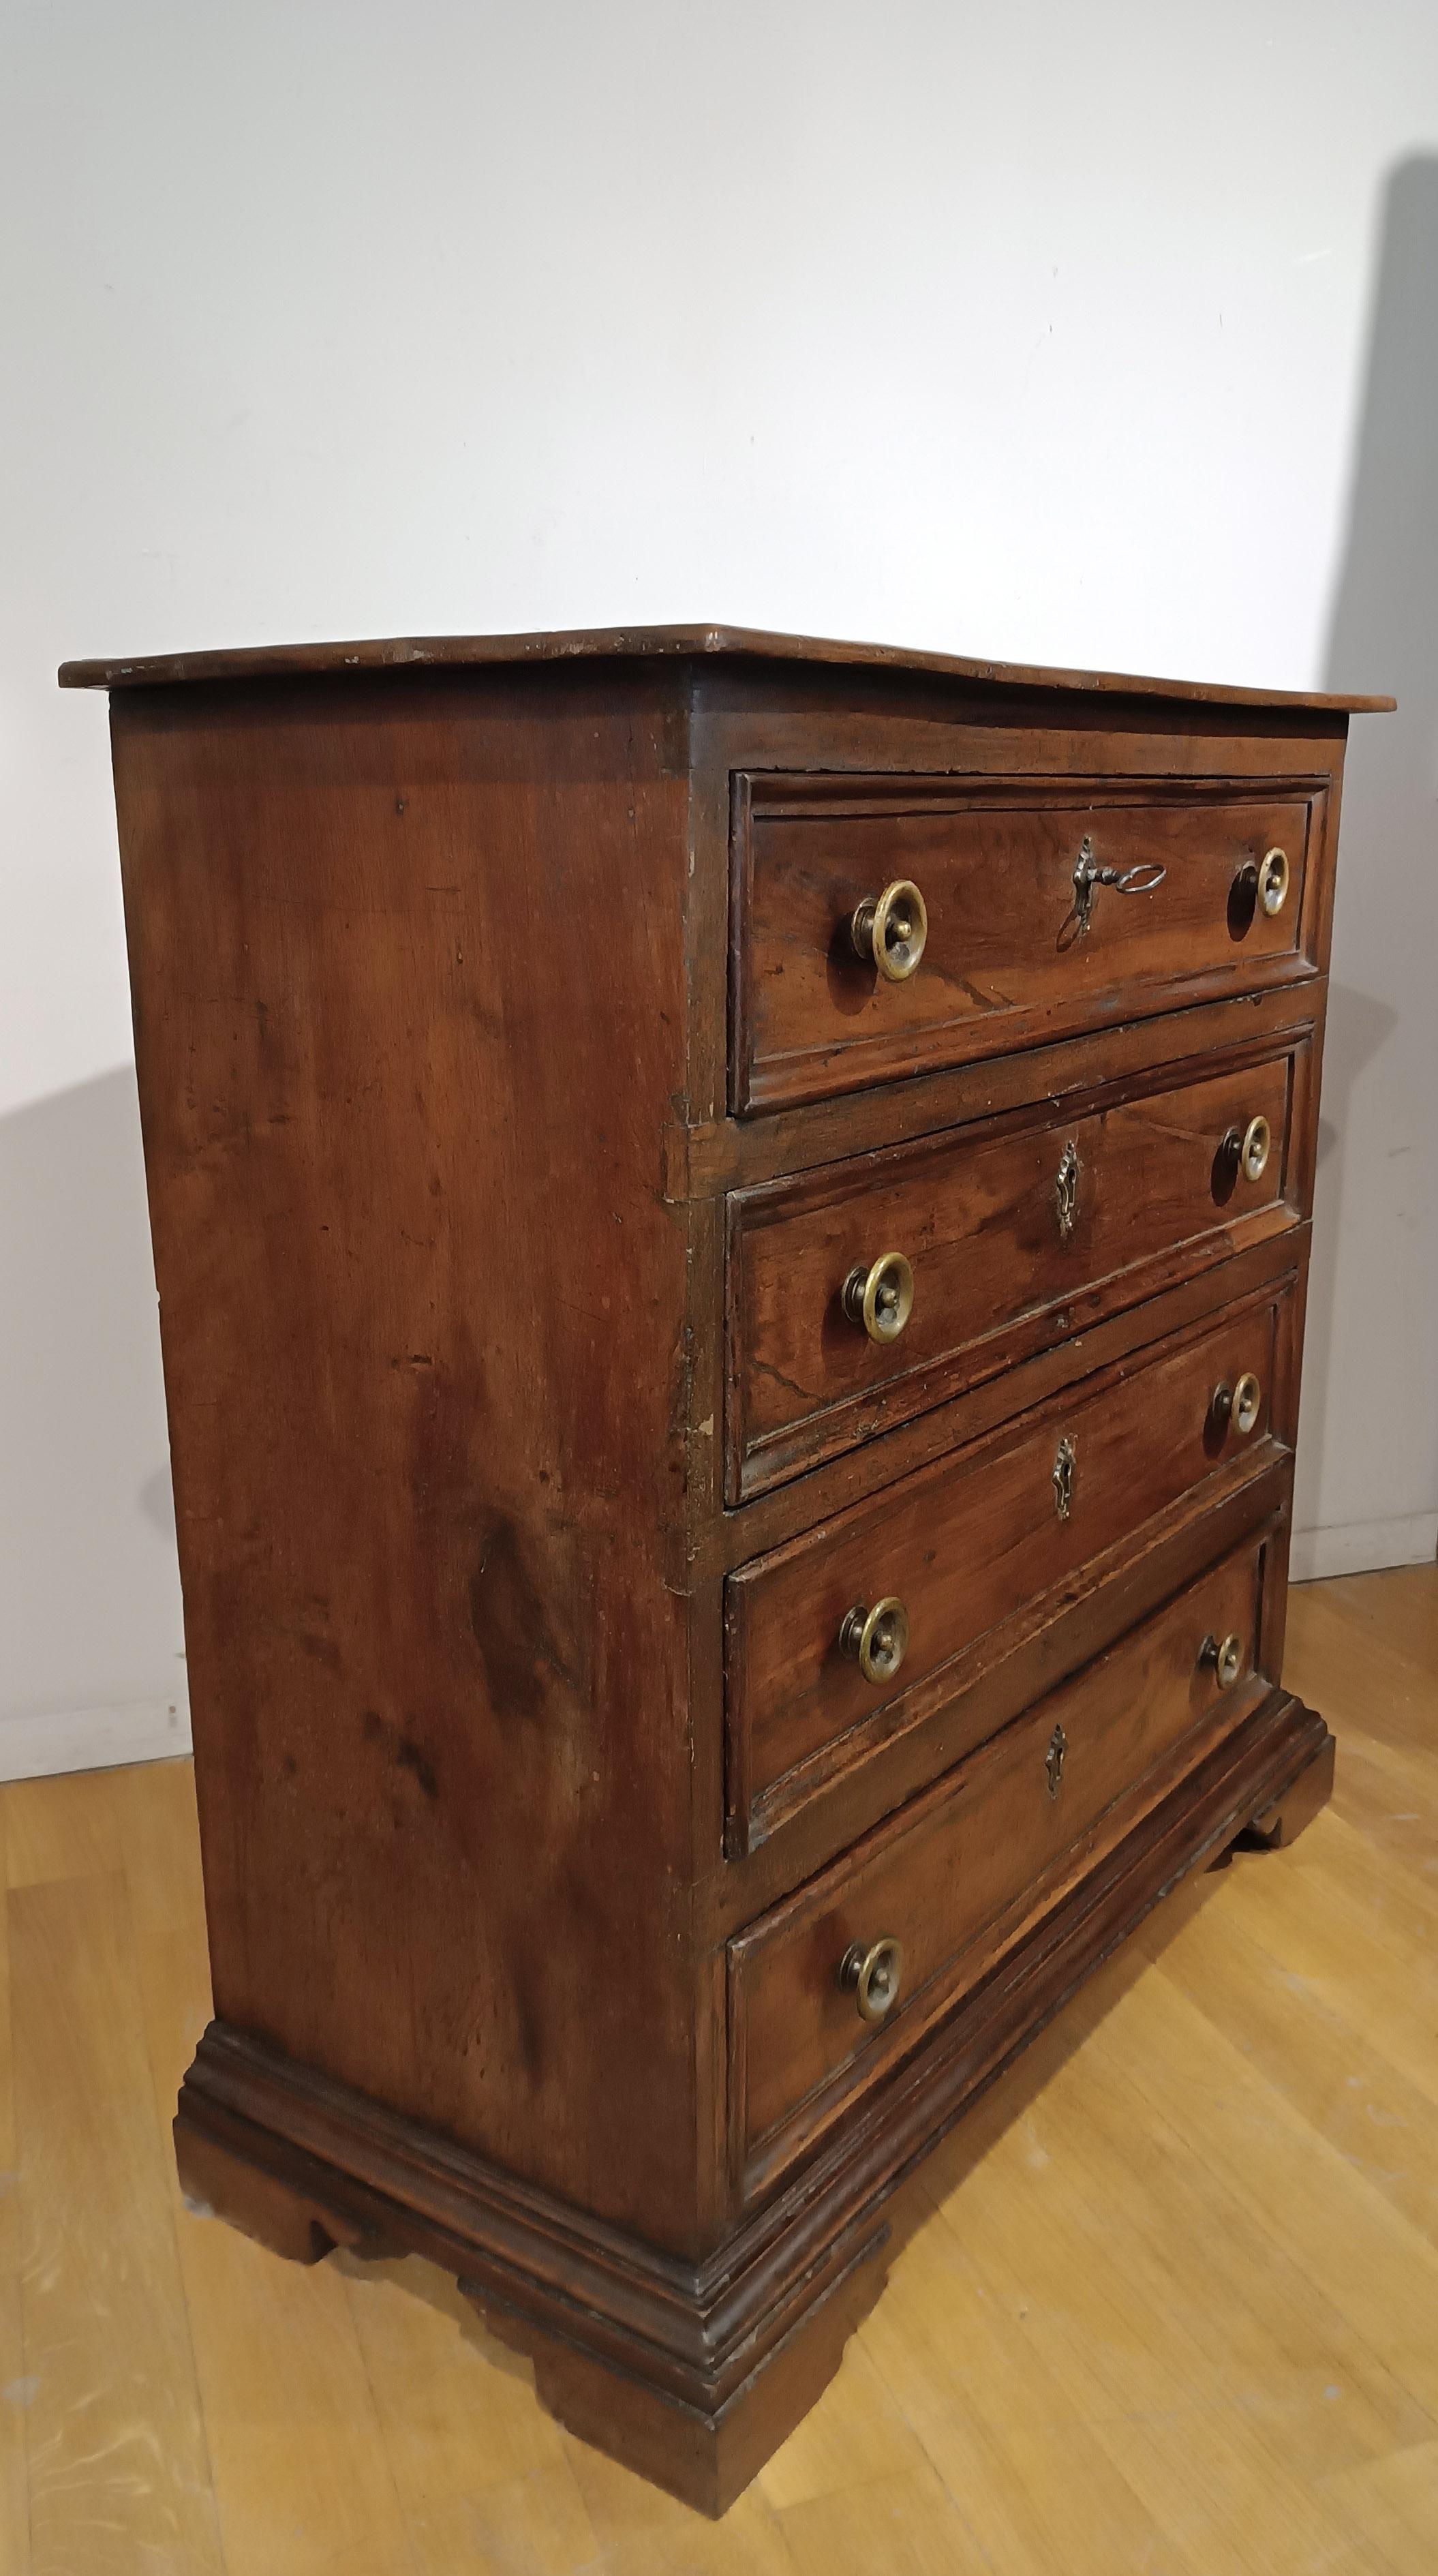 Italian 17th CENTURY CHEST OF DRAWERS IN SOLID AND VENEREED WALNUT